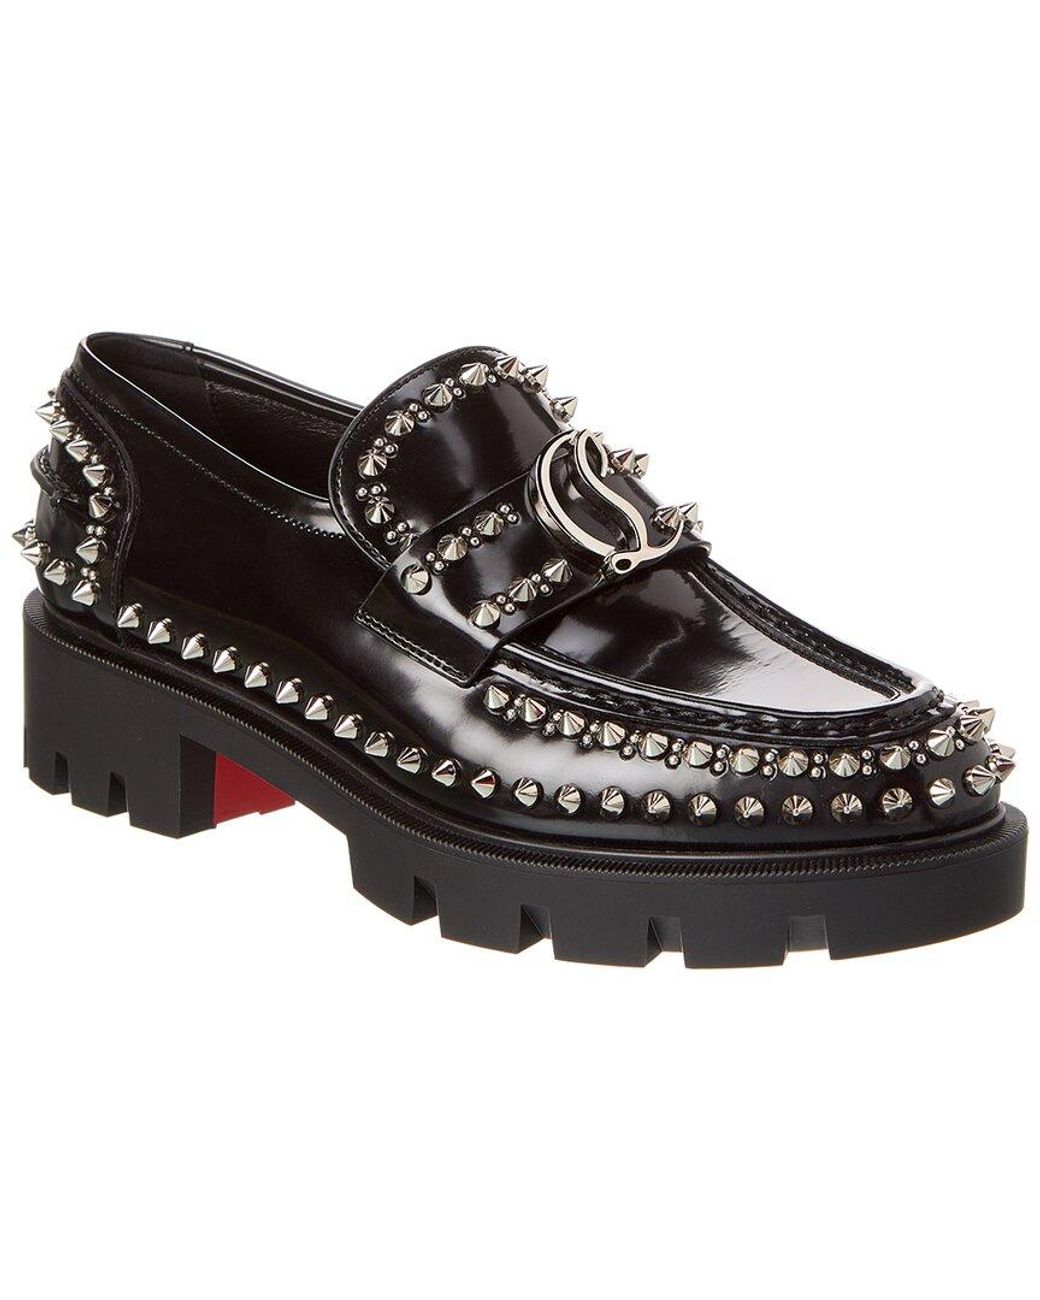 Christian Louboutin Cl Moc Lug Spikes Leather Loafer in Black